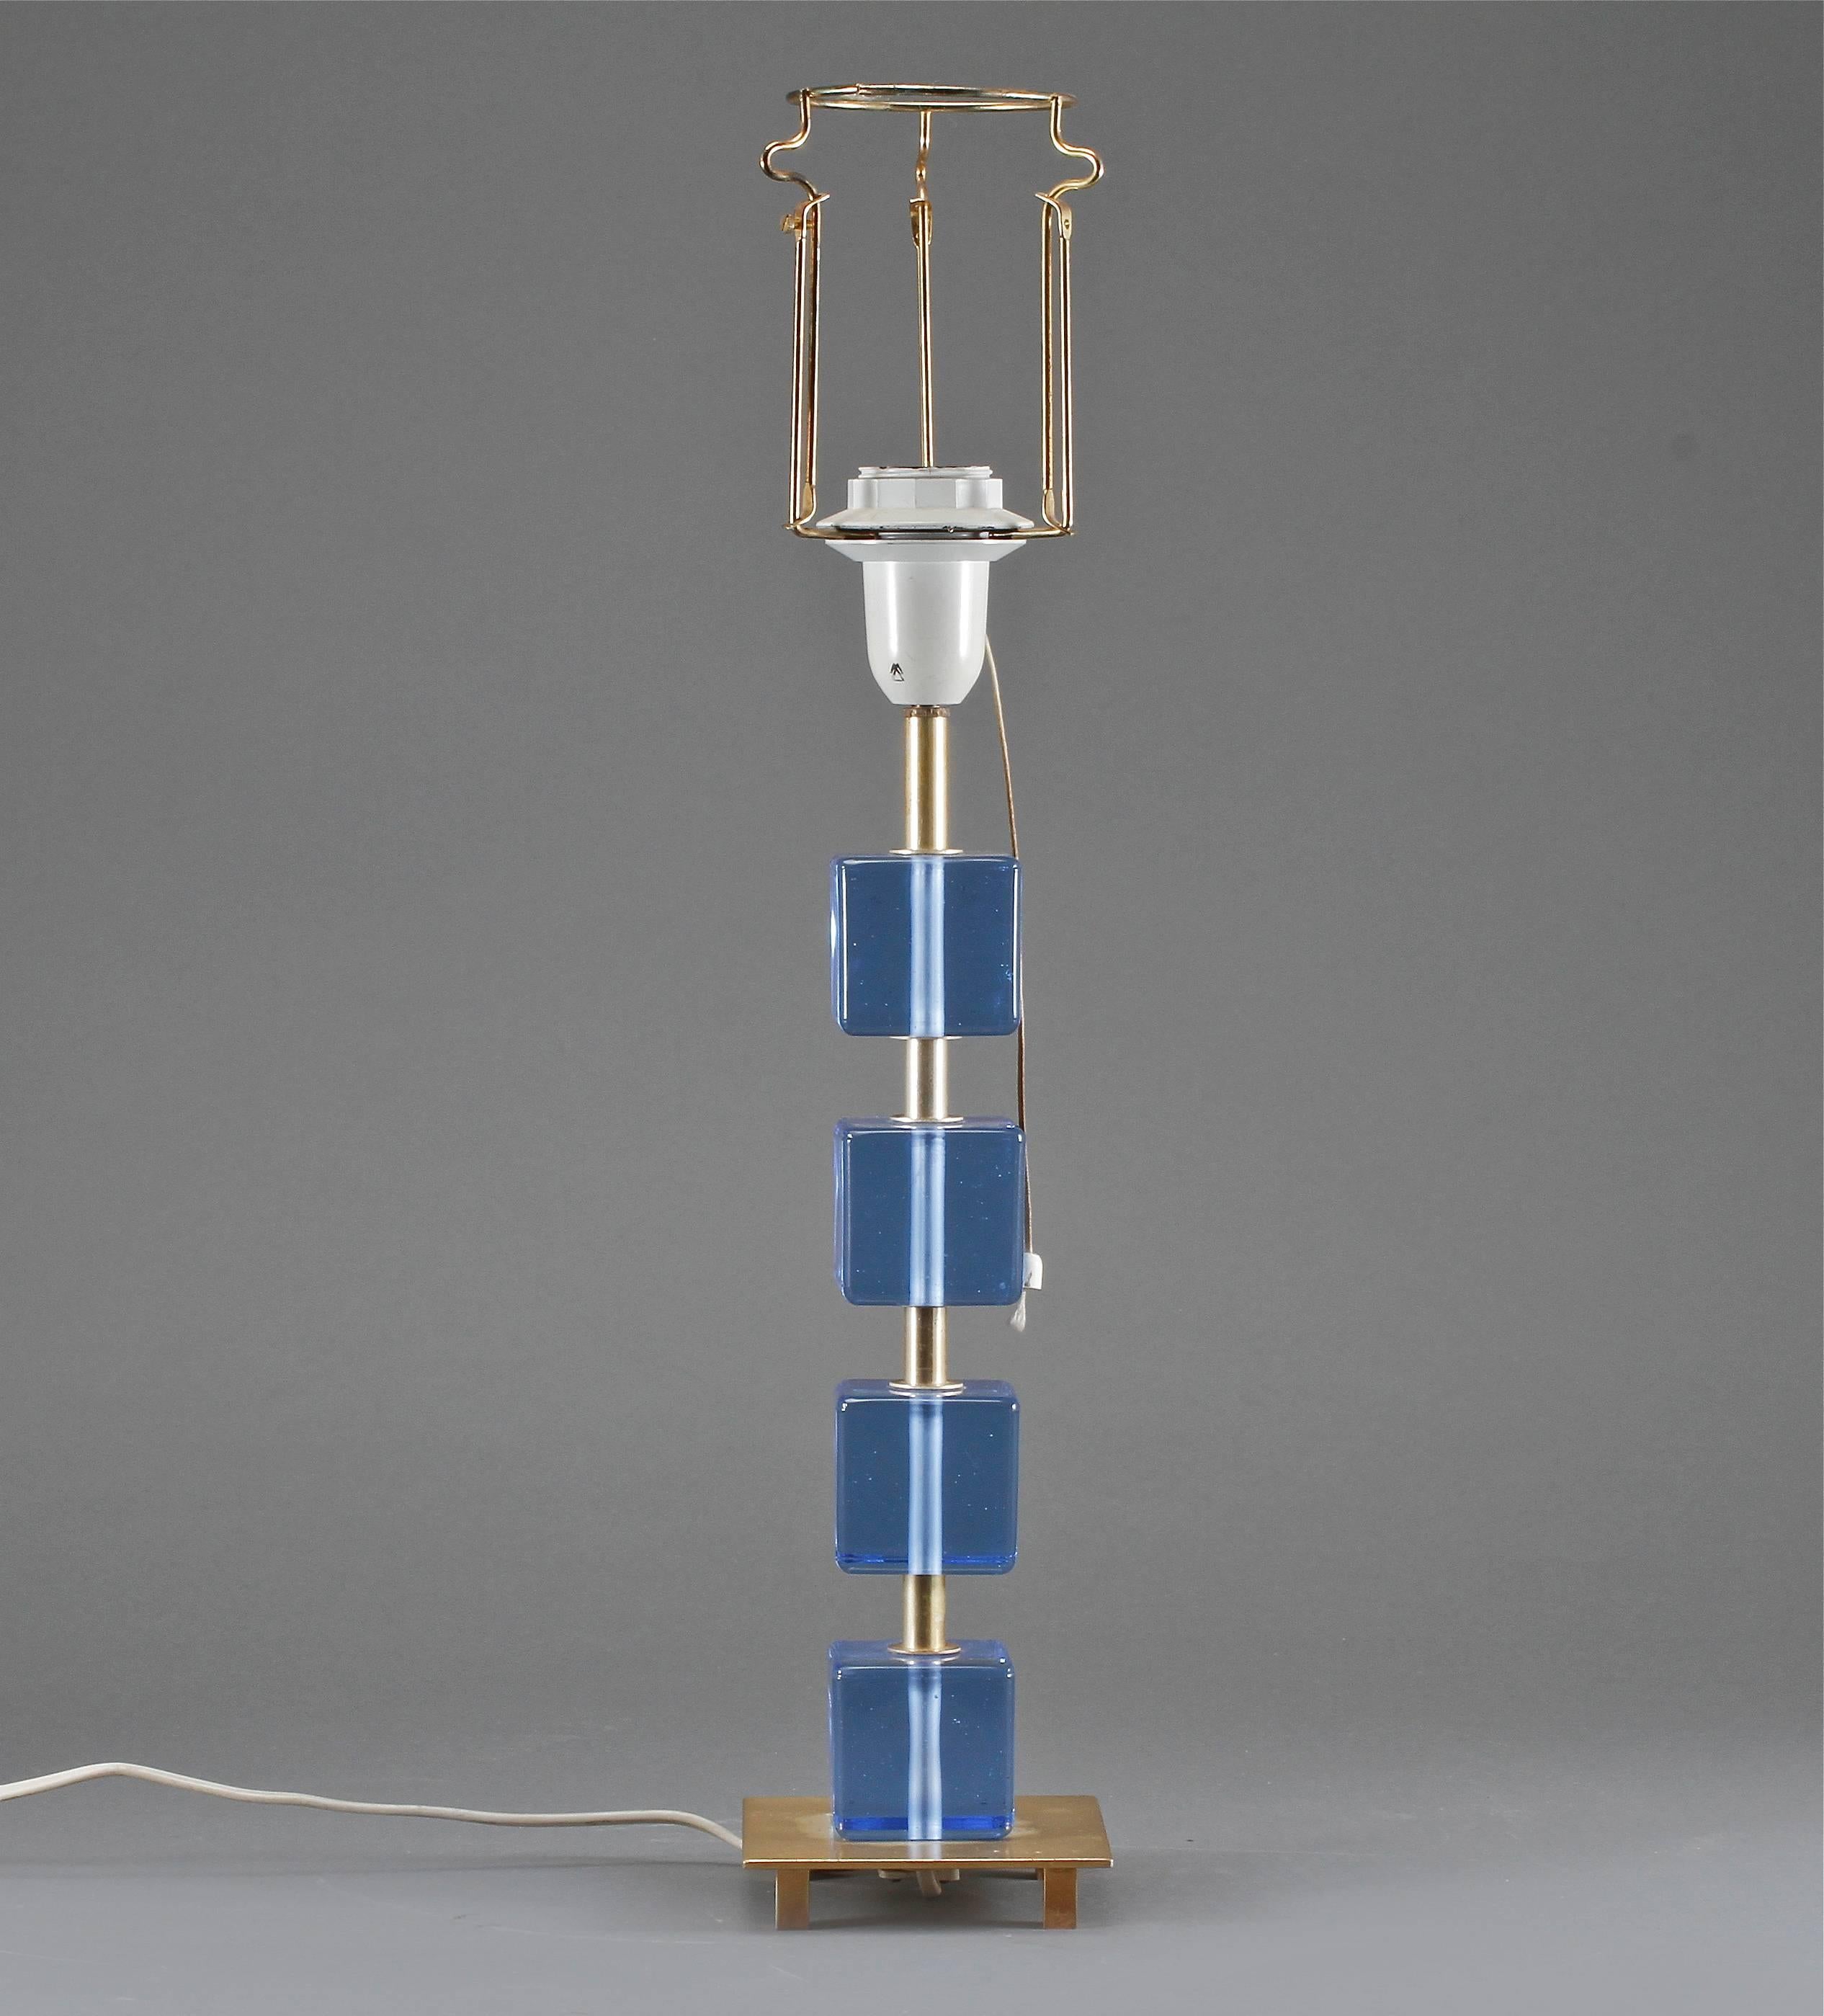 A table lamp made by Malmo Mettalyarufabrik AB, Sweden, circa 1960s.
Blue glass and brass. Measures: H 26"; base H 15" without socket. Brass base 4.25" x 4.25"; glass cubes 2.25" x 2.25".
Existing wiring. Rewiring